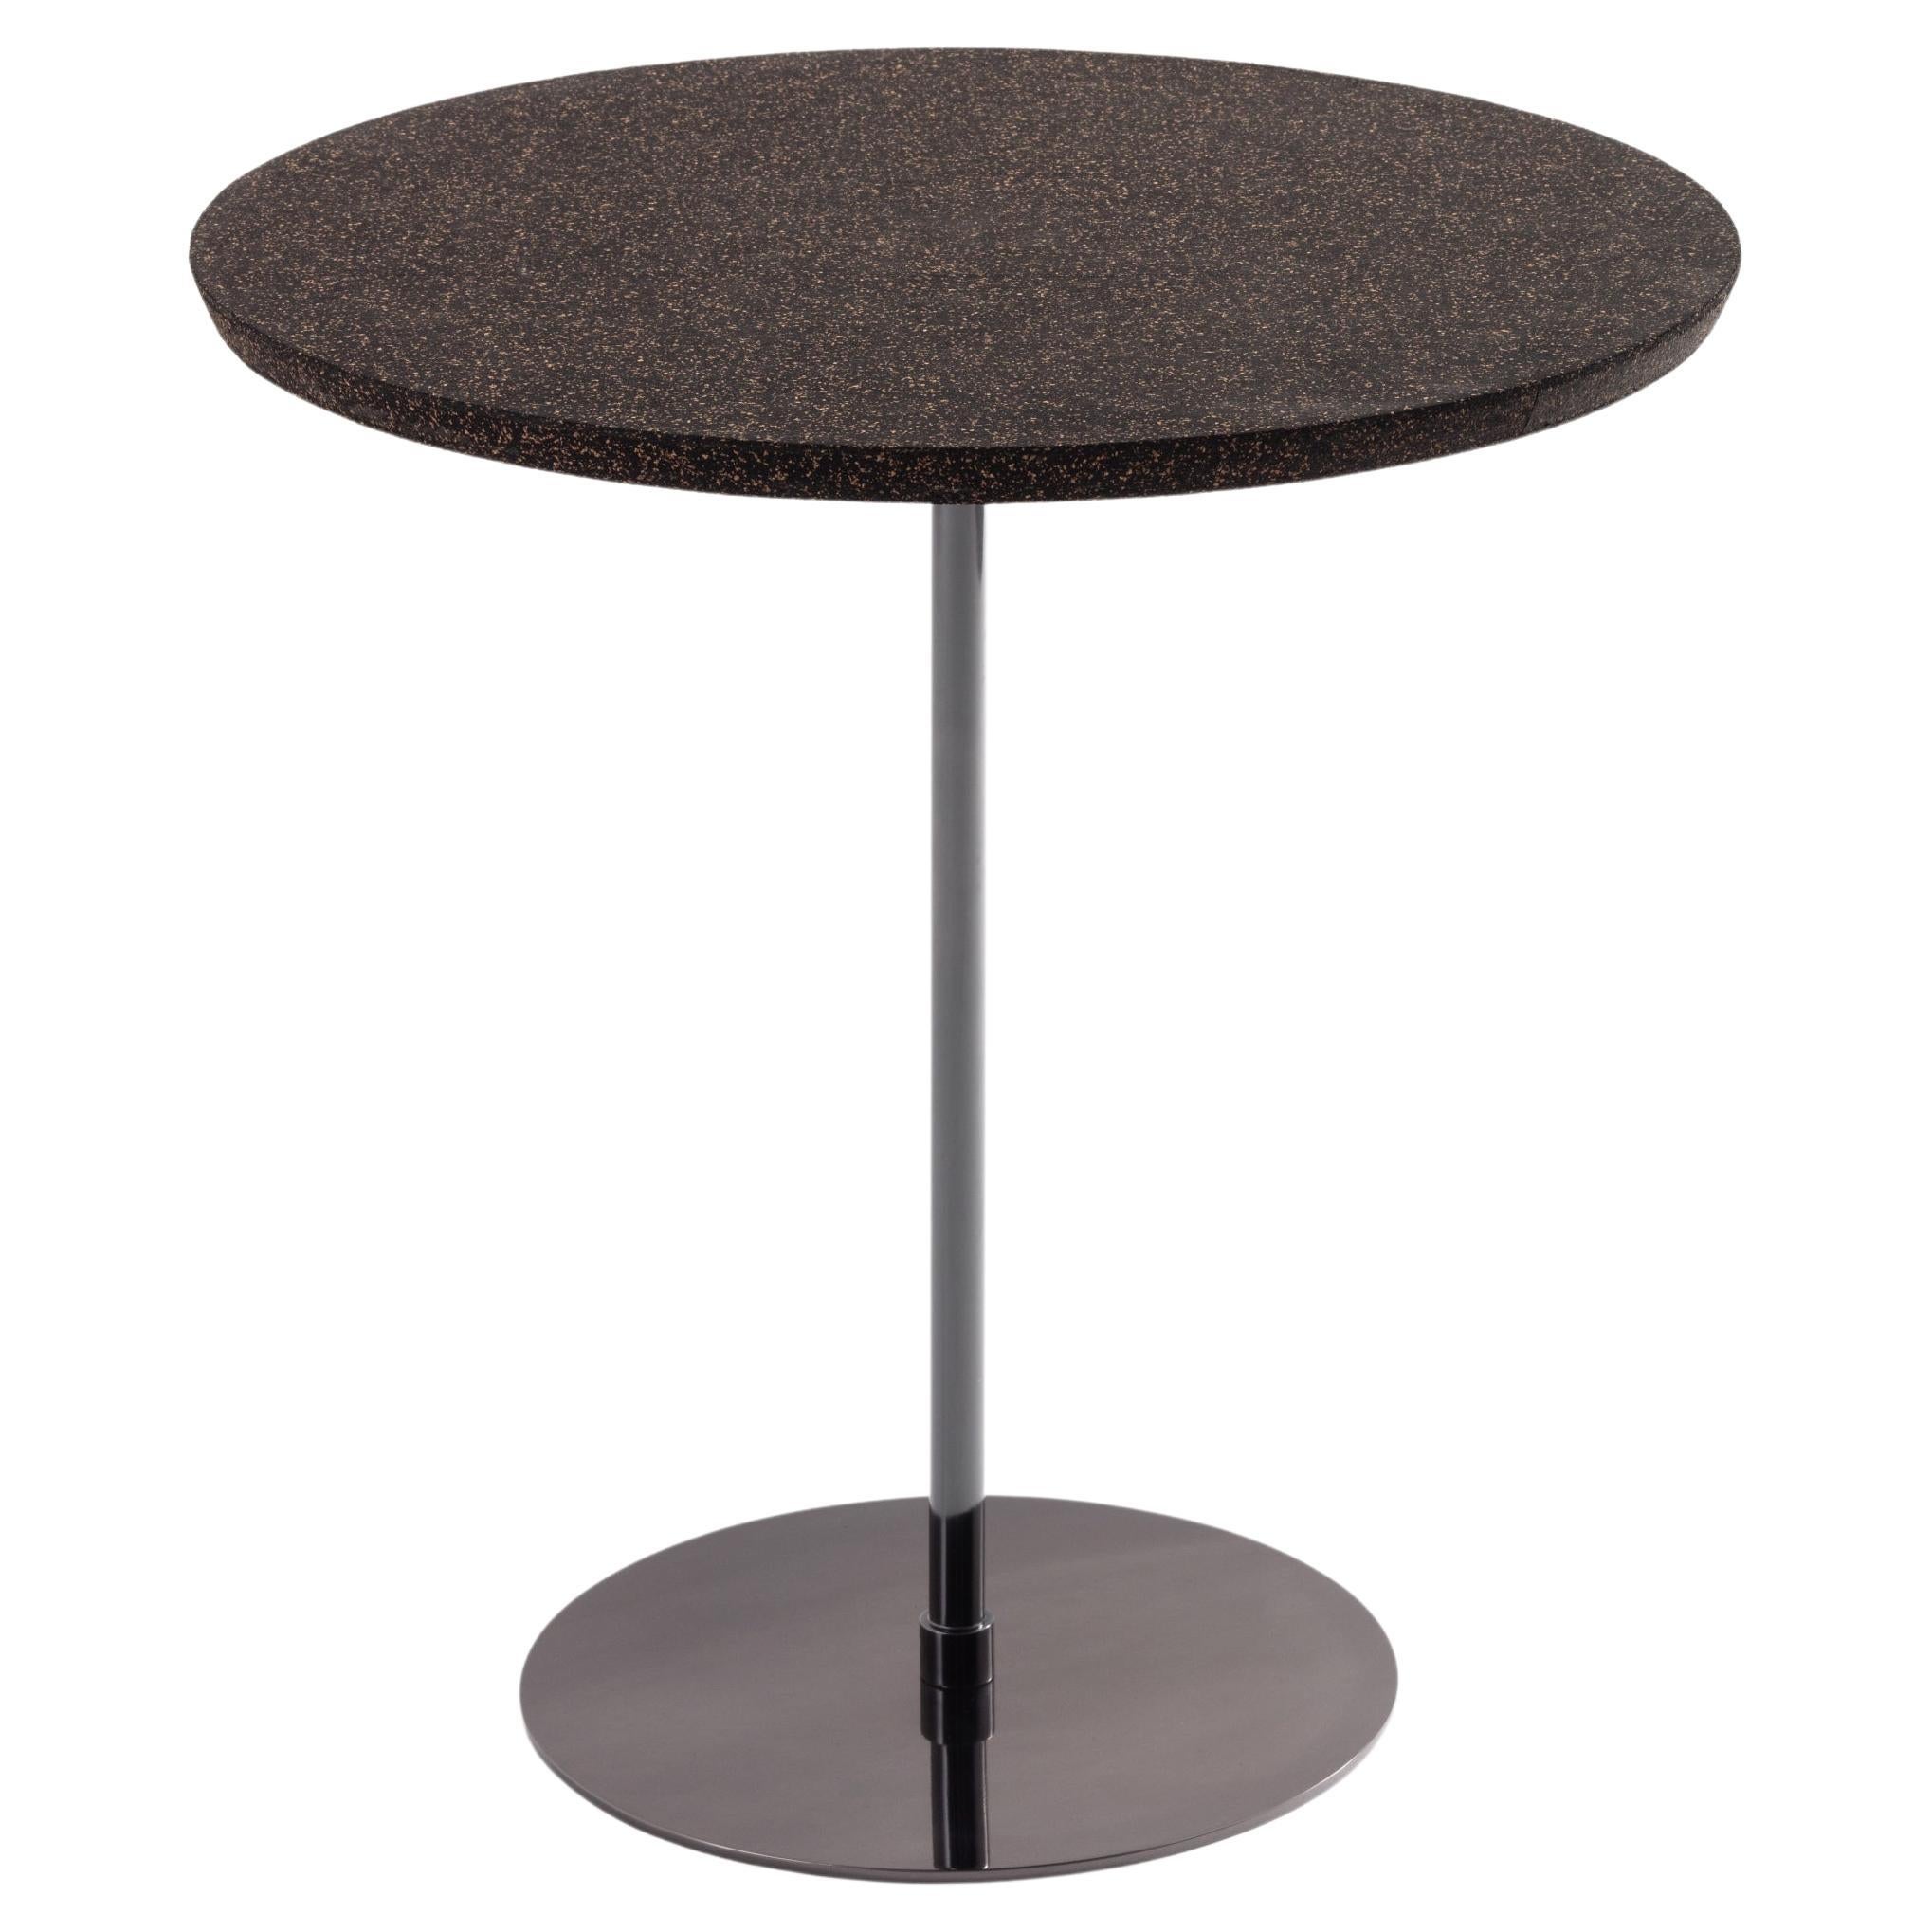 ADDITIONAL DISK TABLE
The disco side table is lightweight and versatile, it looks great combined with the disco side table. Its top can be in natural cork or black rubberized cork and the finishes vary between brass, nickel and onyx, all